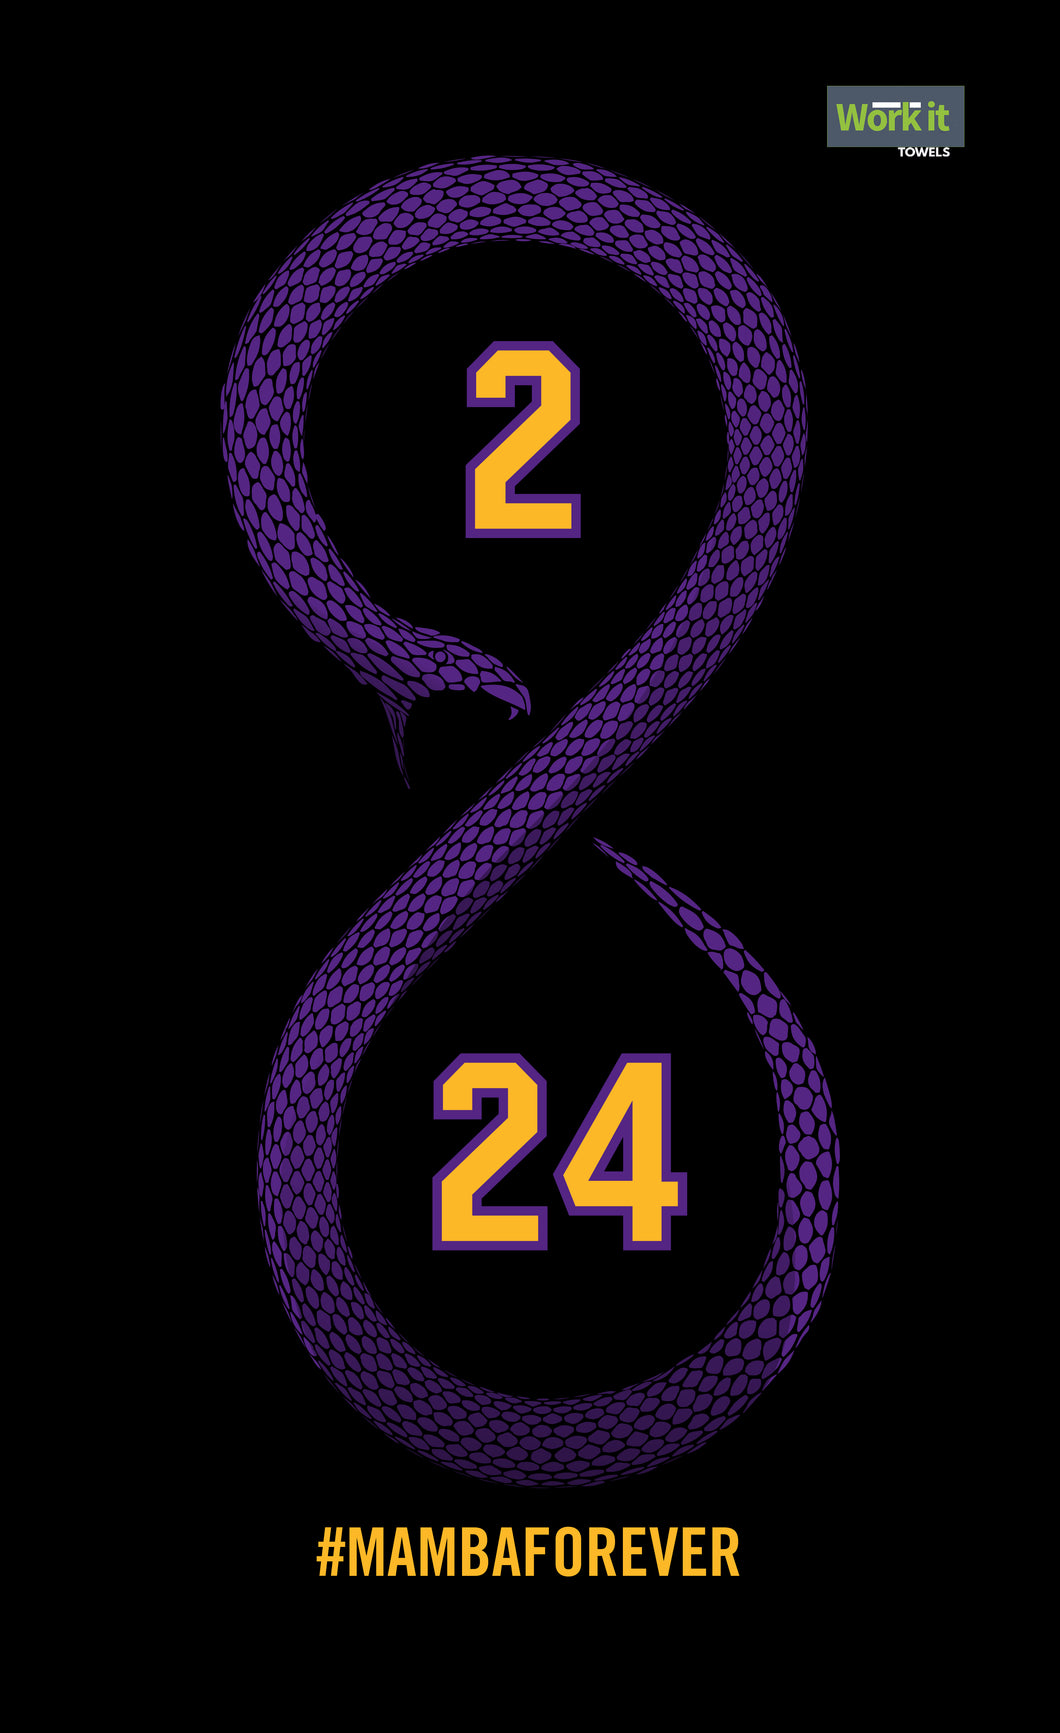 Mamba Forever- purple - work it towels